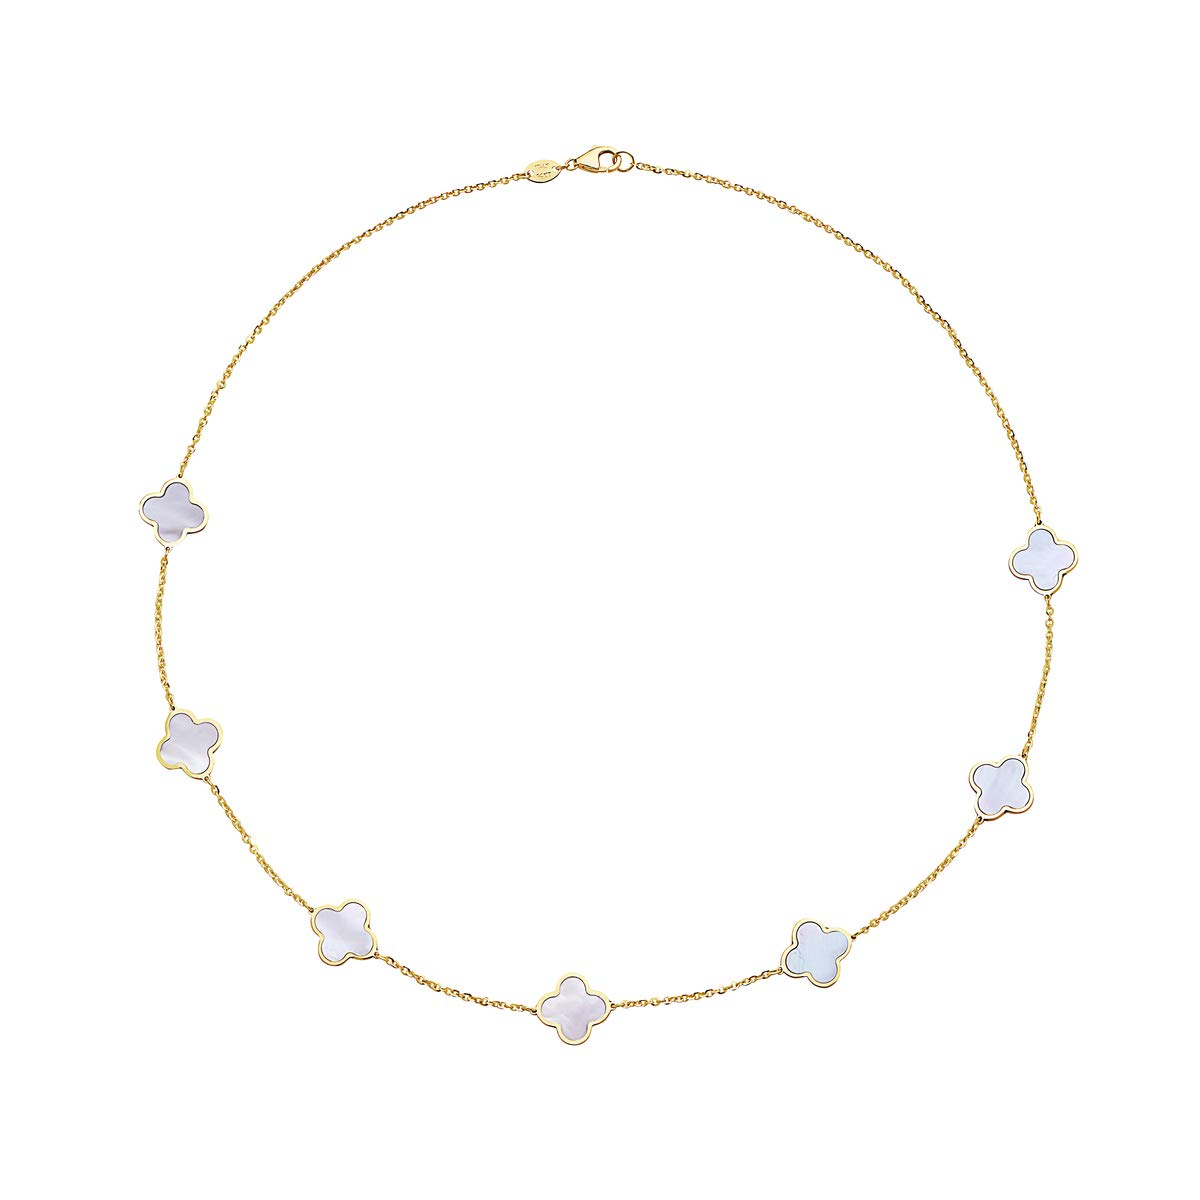 14K Solid Yellow Gold and Mother-of-Pearl Necklace with 7 Clover-Shaped Motifs. 16 inch chain size